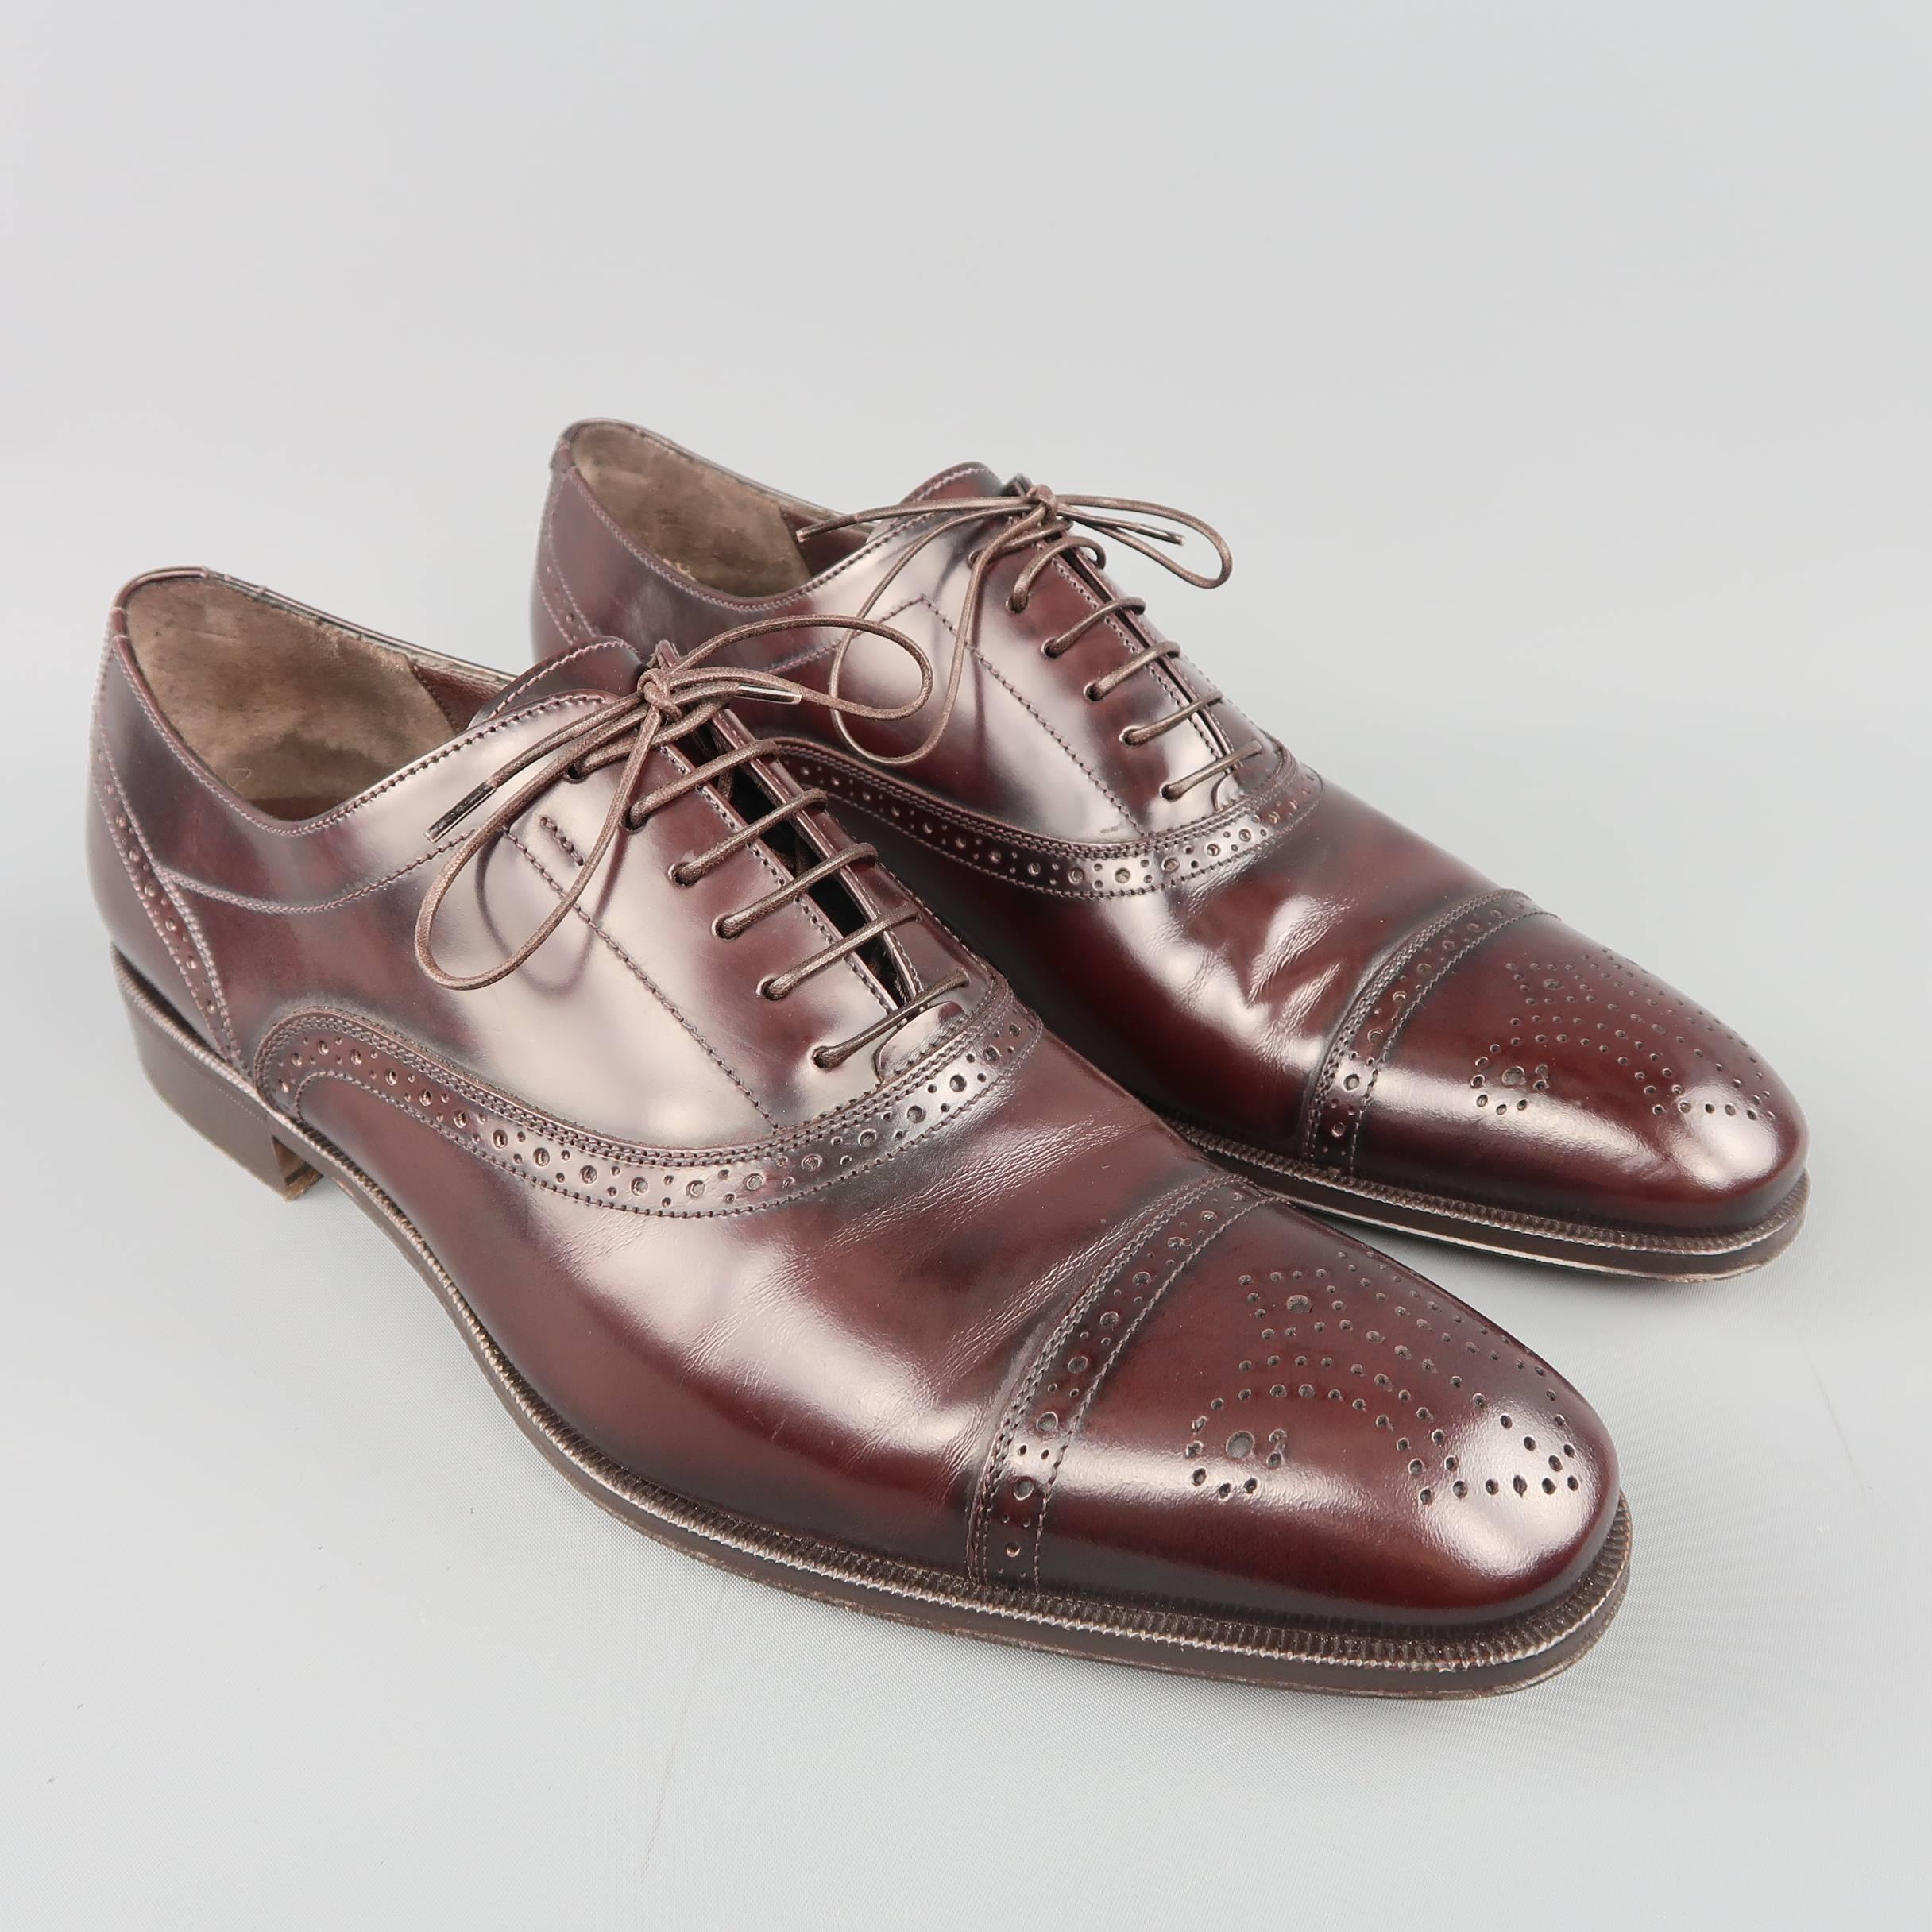 SALVATORE FERRAGAMO dress shoes come in burgundy tone brown smooth leather with a pointed cap toe and brogue details throughout. Made in Italy.
 
Excellent Pre-Owned Condition.
Marked: UK 9.5 D
 
Outsole: 12 x 4 in.
